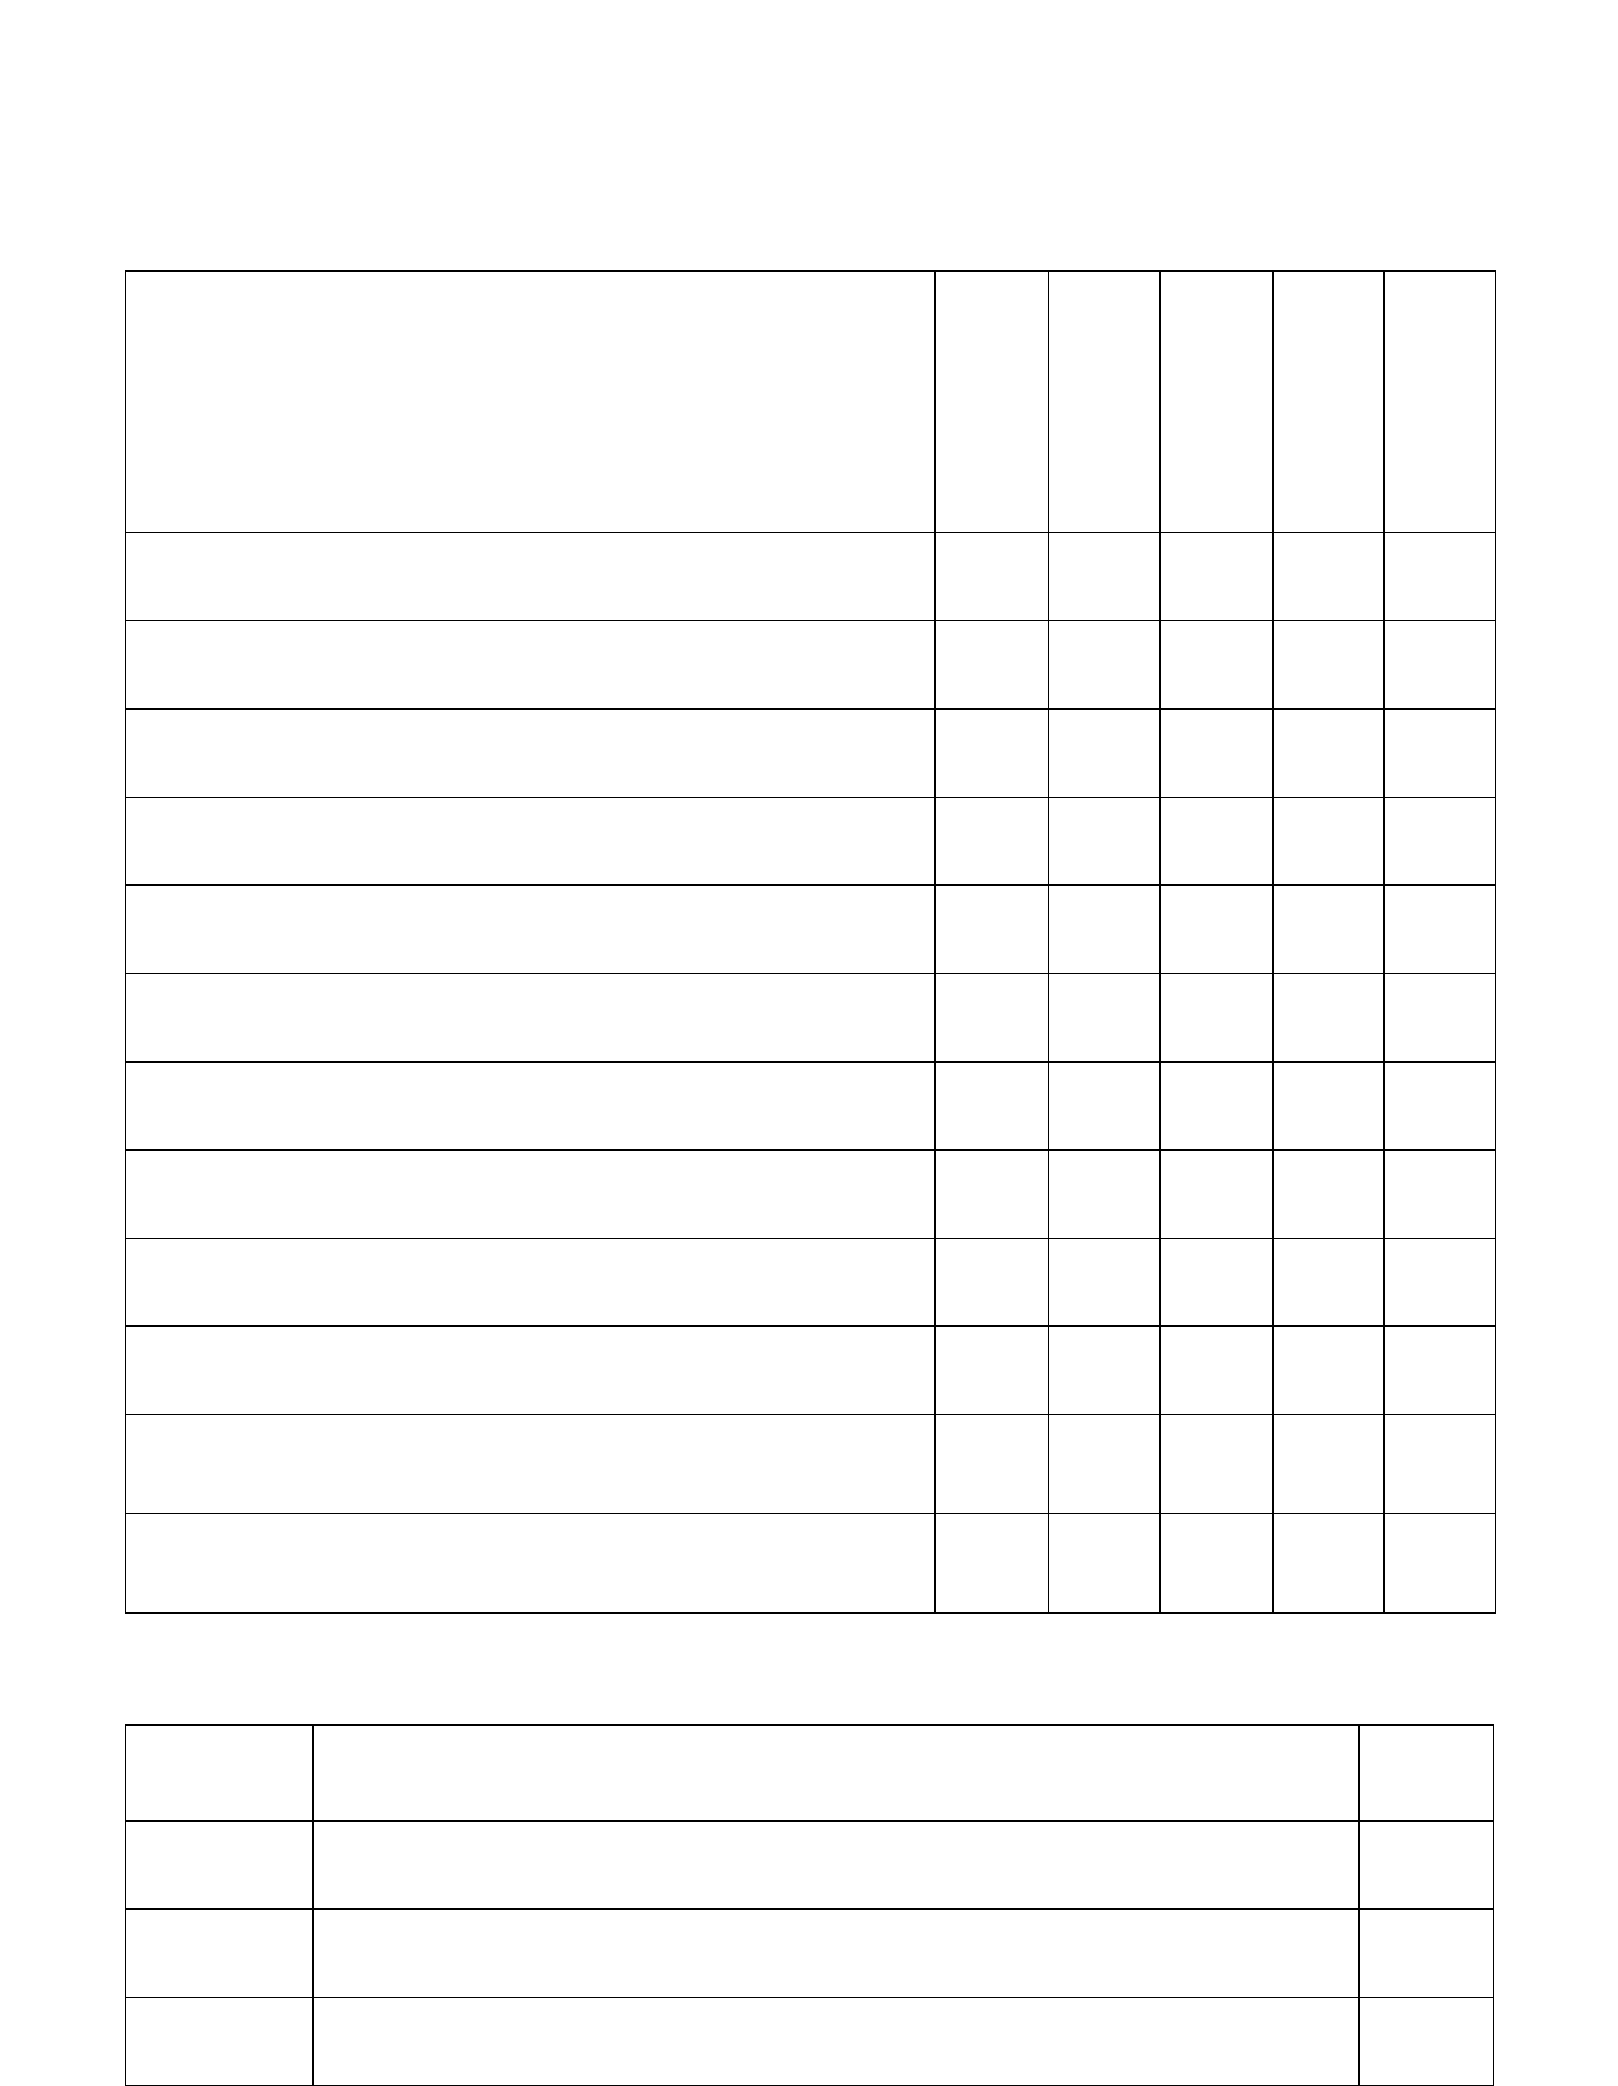 Excel Hiring Rubric Template / free employee evaluation ...